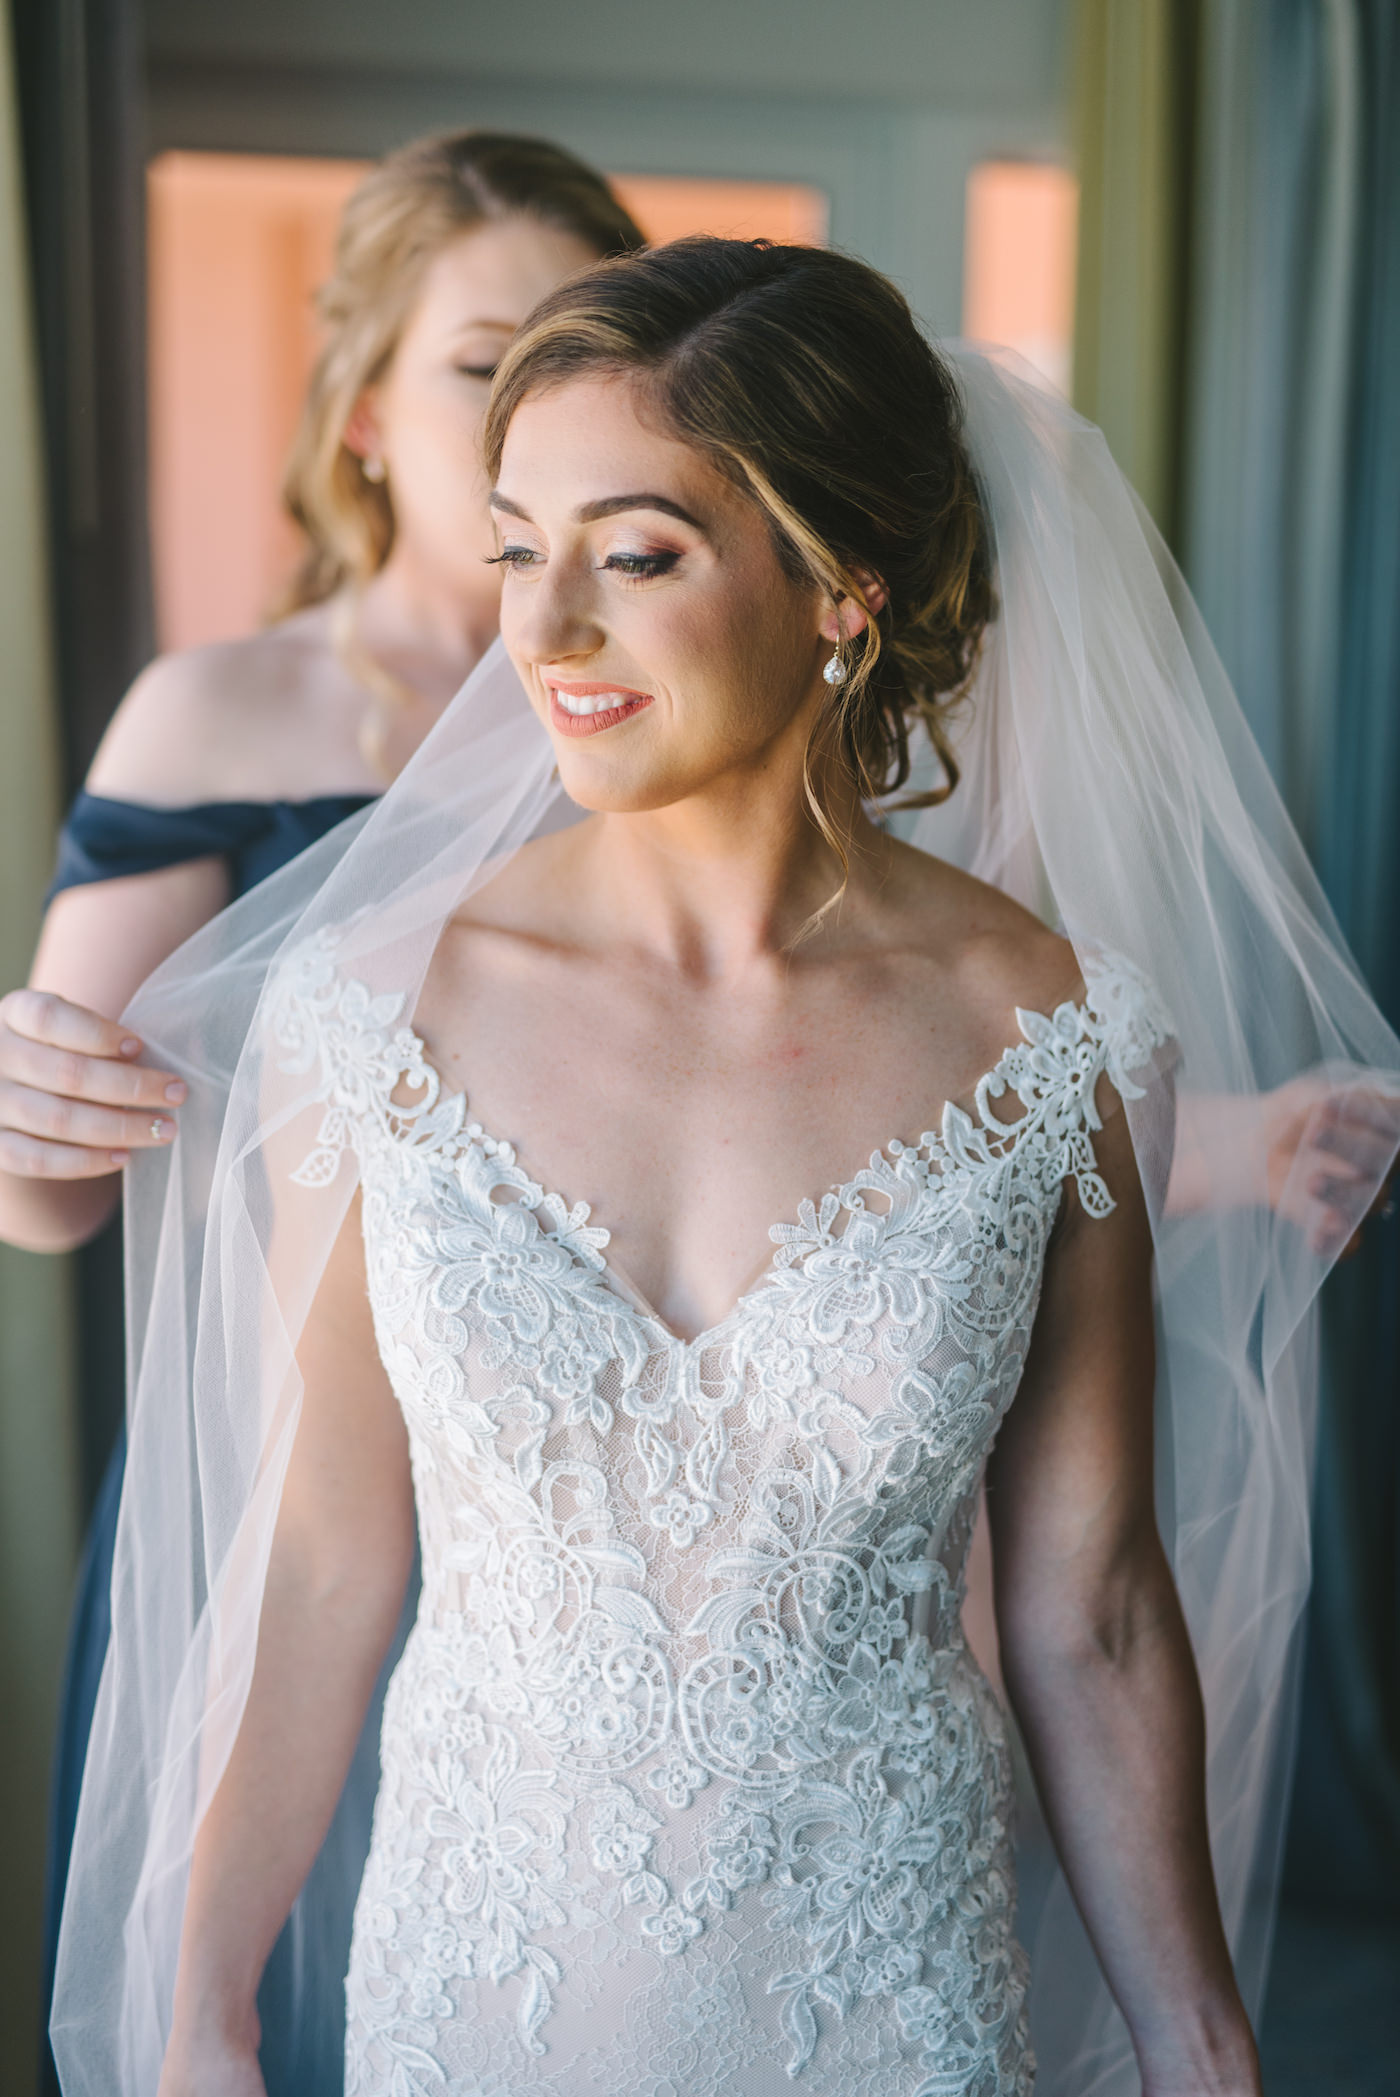 Ivory and Champagne Lilian West Wedding Dress Bridal Gown with V Neck Off The Shoulder Straps and Long Cathedral Veil | Tampa Bay Wedding Photographer Kera Photography